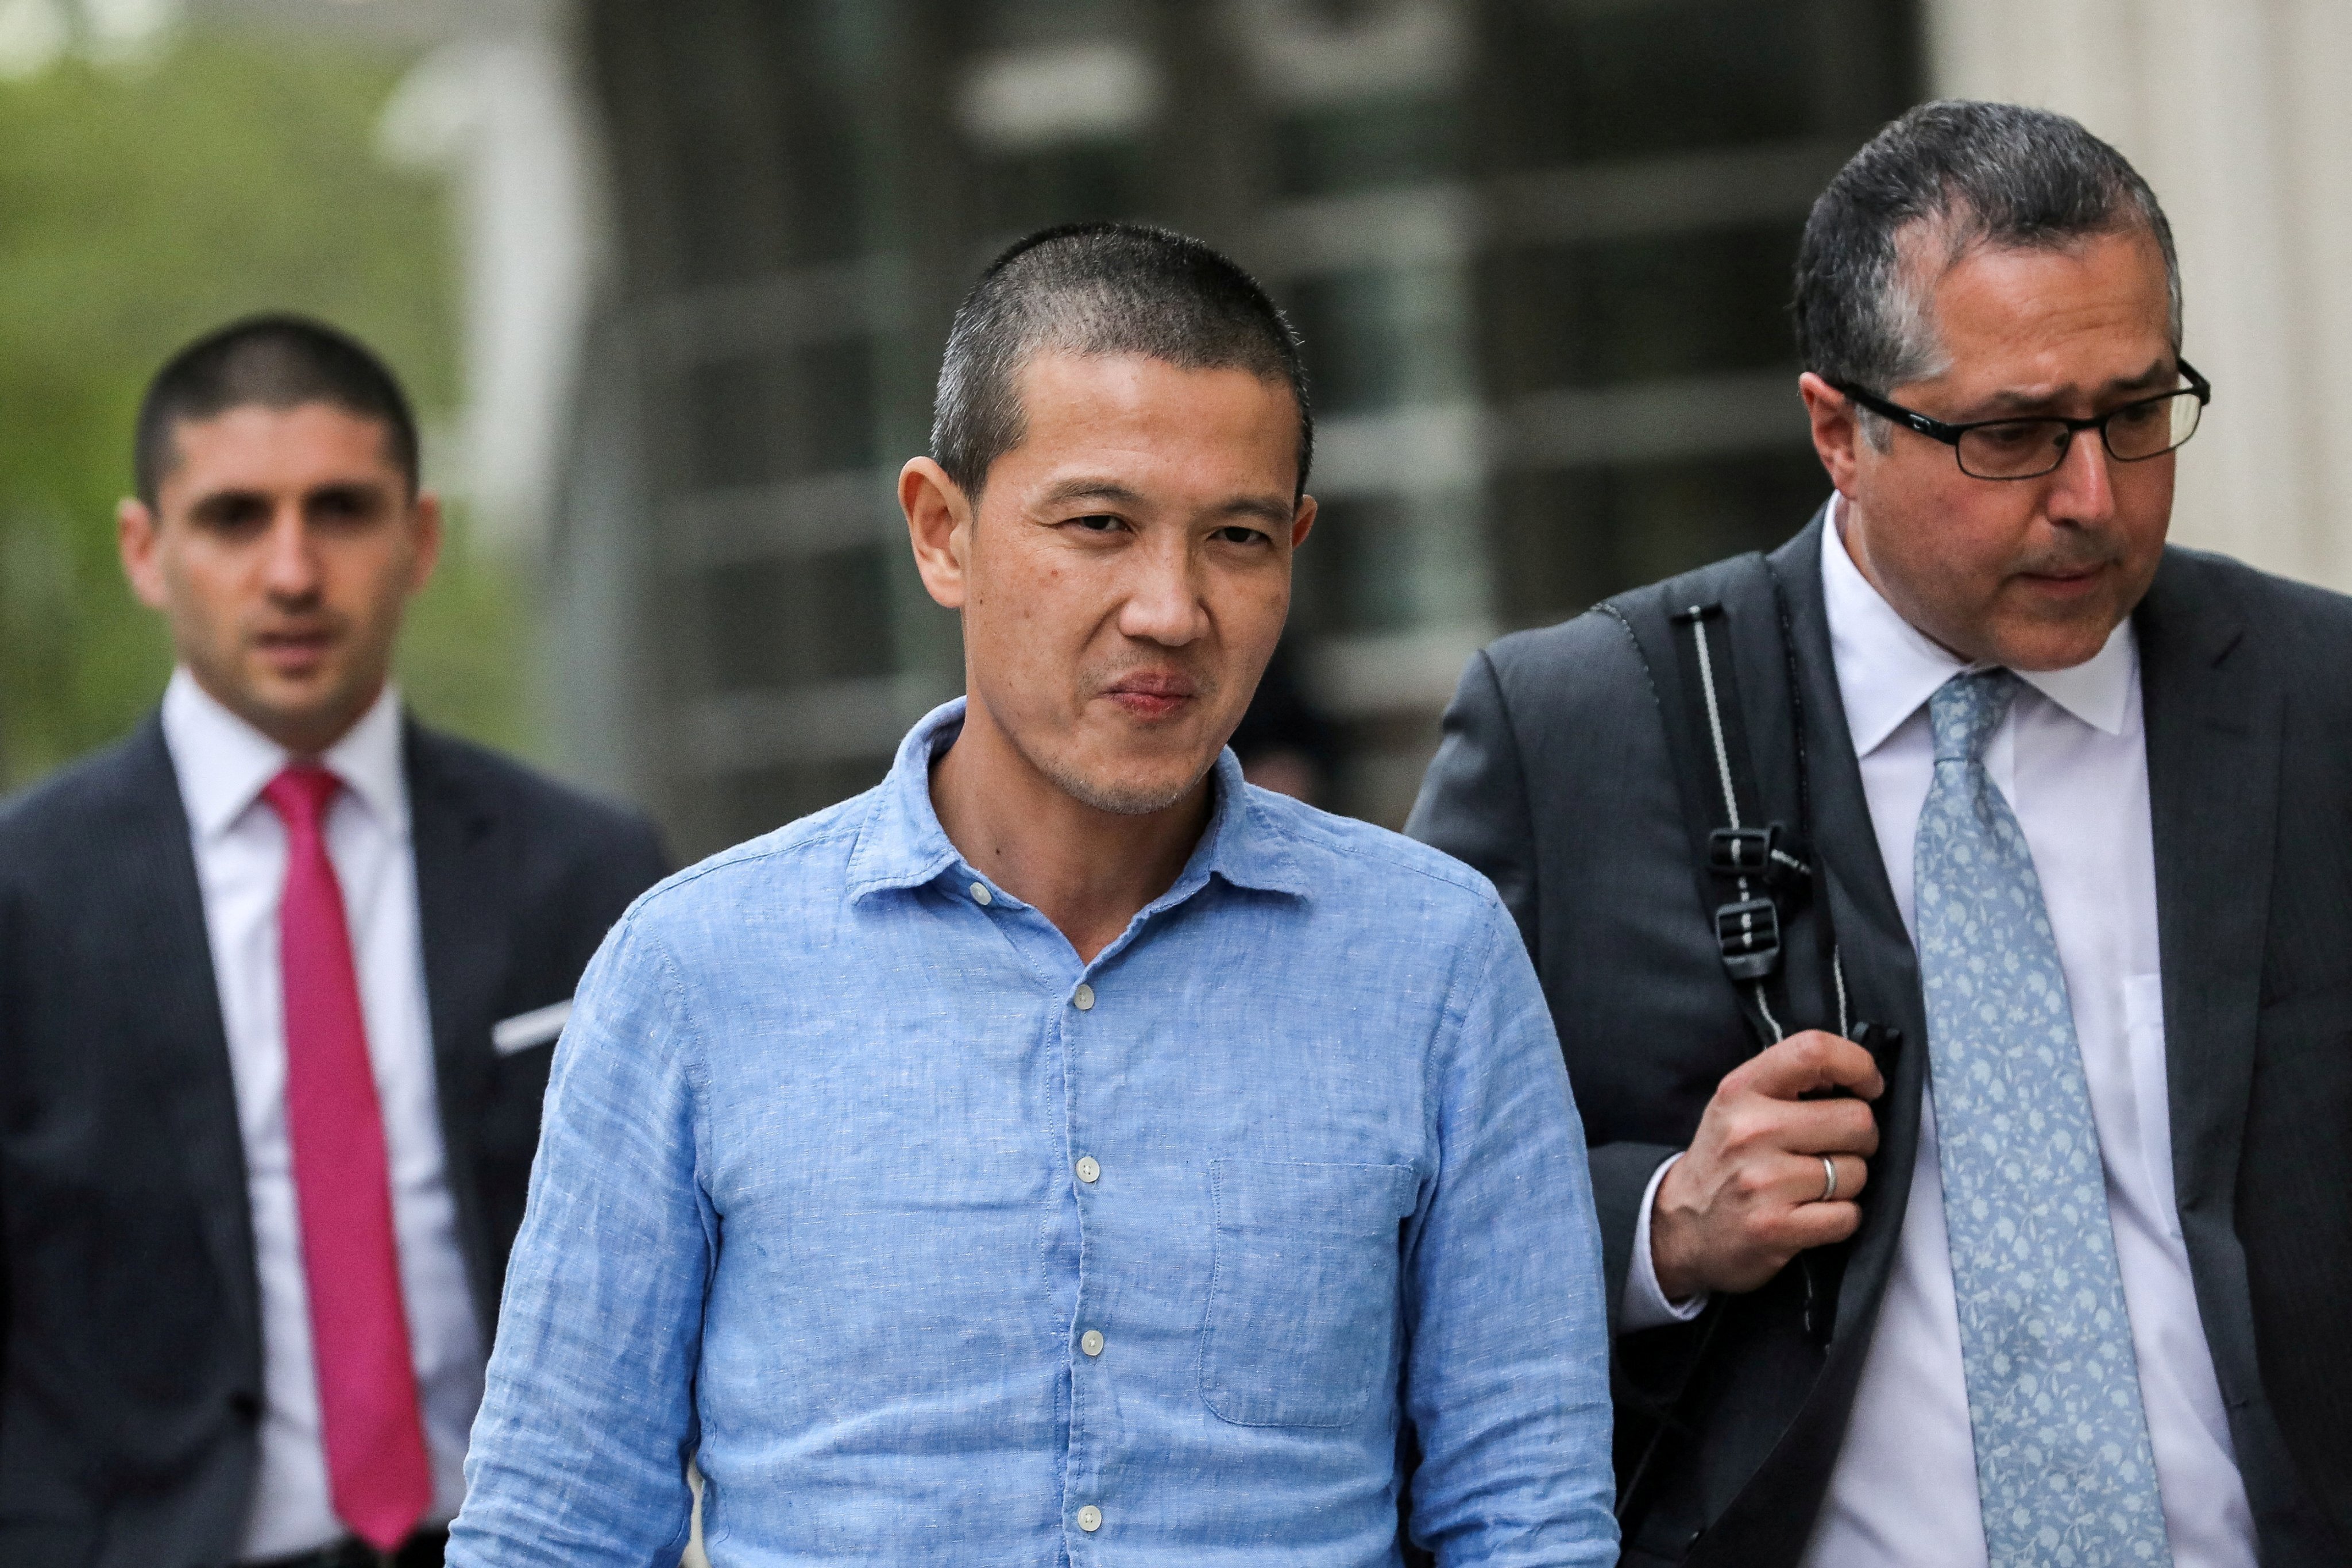 Ex-Goldman Sachs banker Roger Ng (centre) and his lawyer Marc Agnifilo (right) leave federal court in New York in May 2019. Photo: Reuters